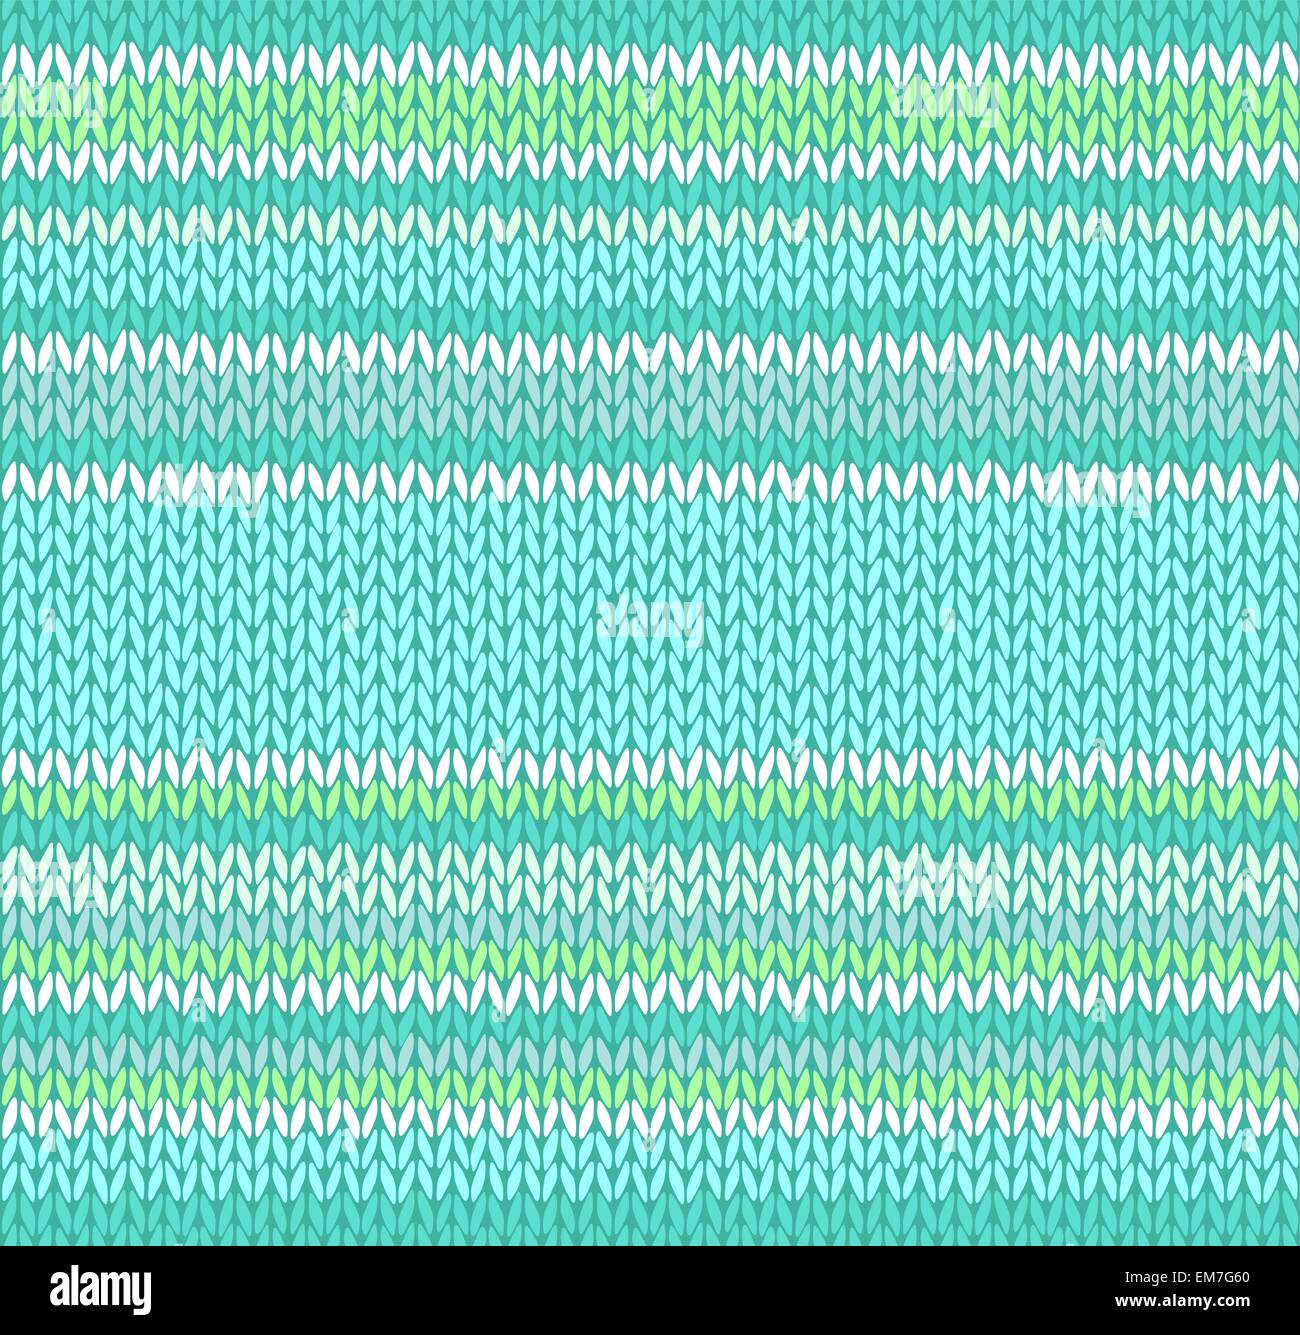 Style Seamless Green Blue White Color Light Vector Knitted Patte Stock Vector